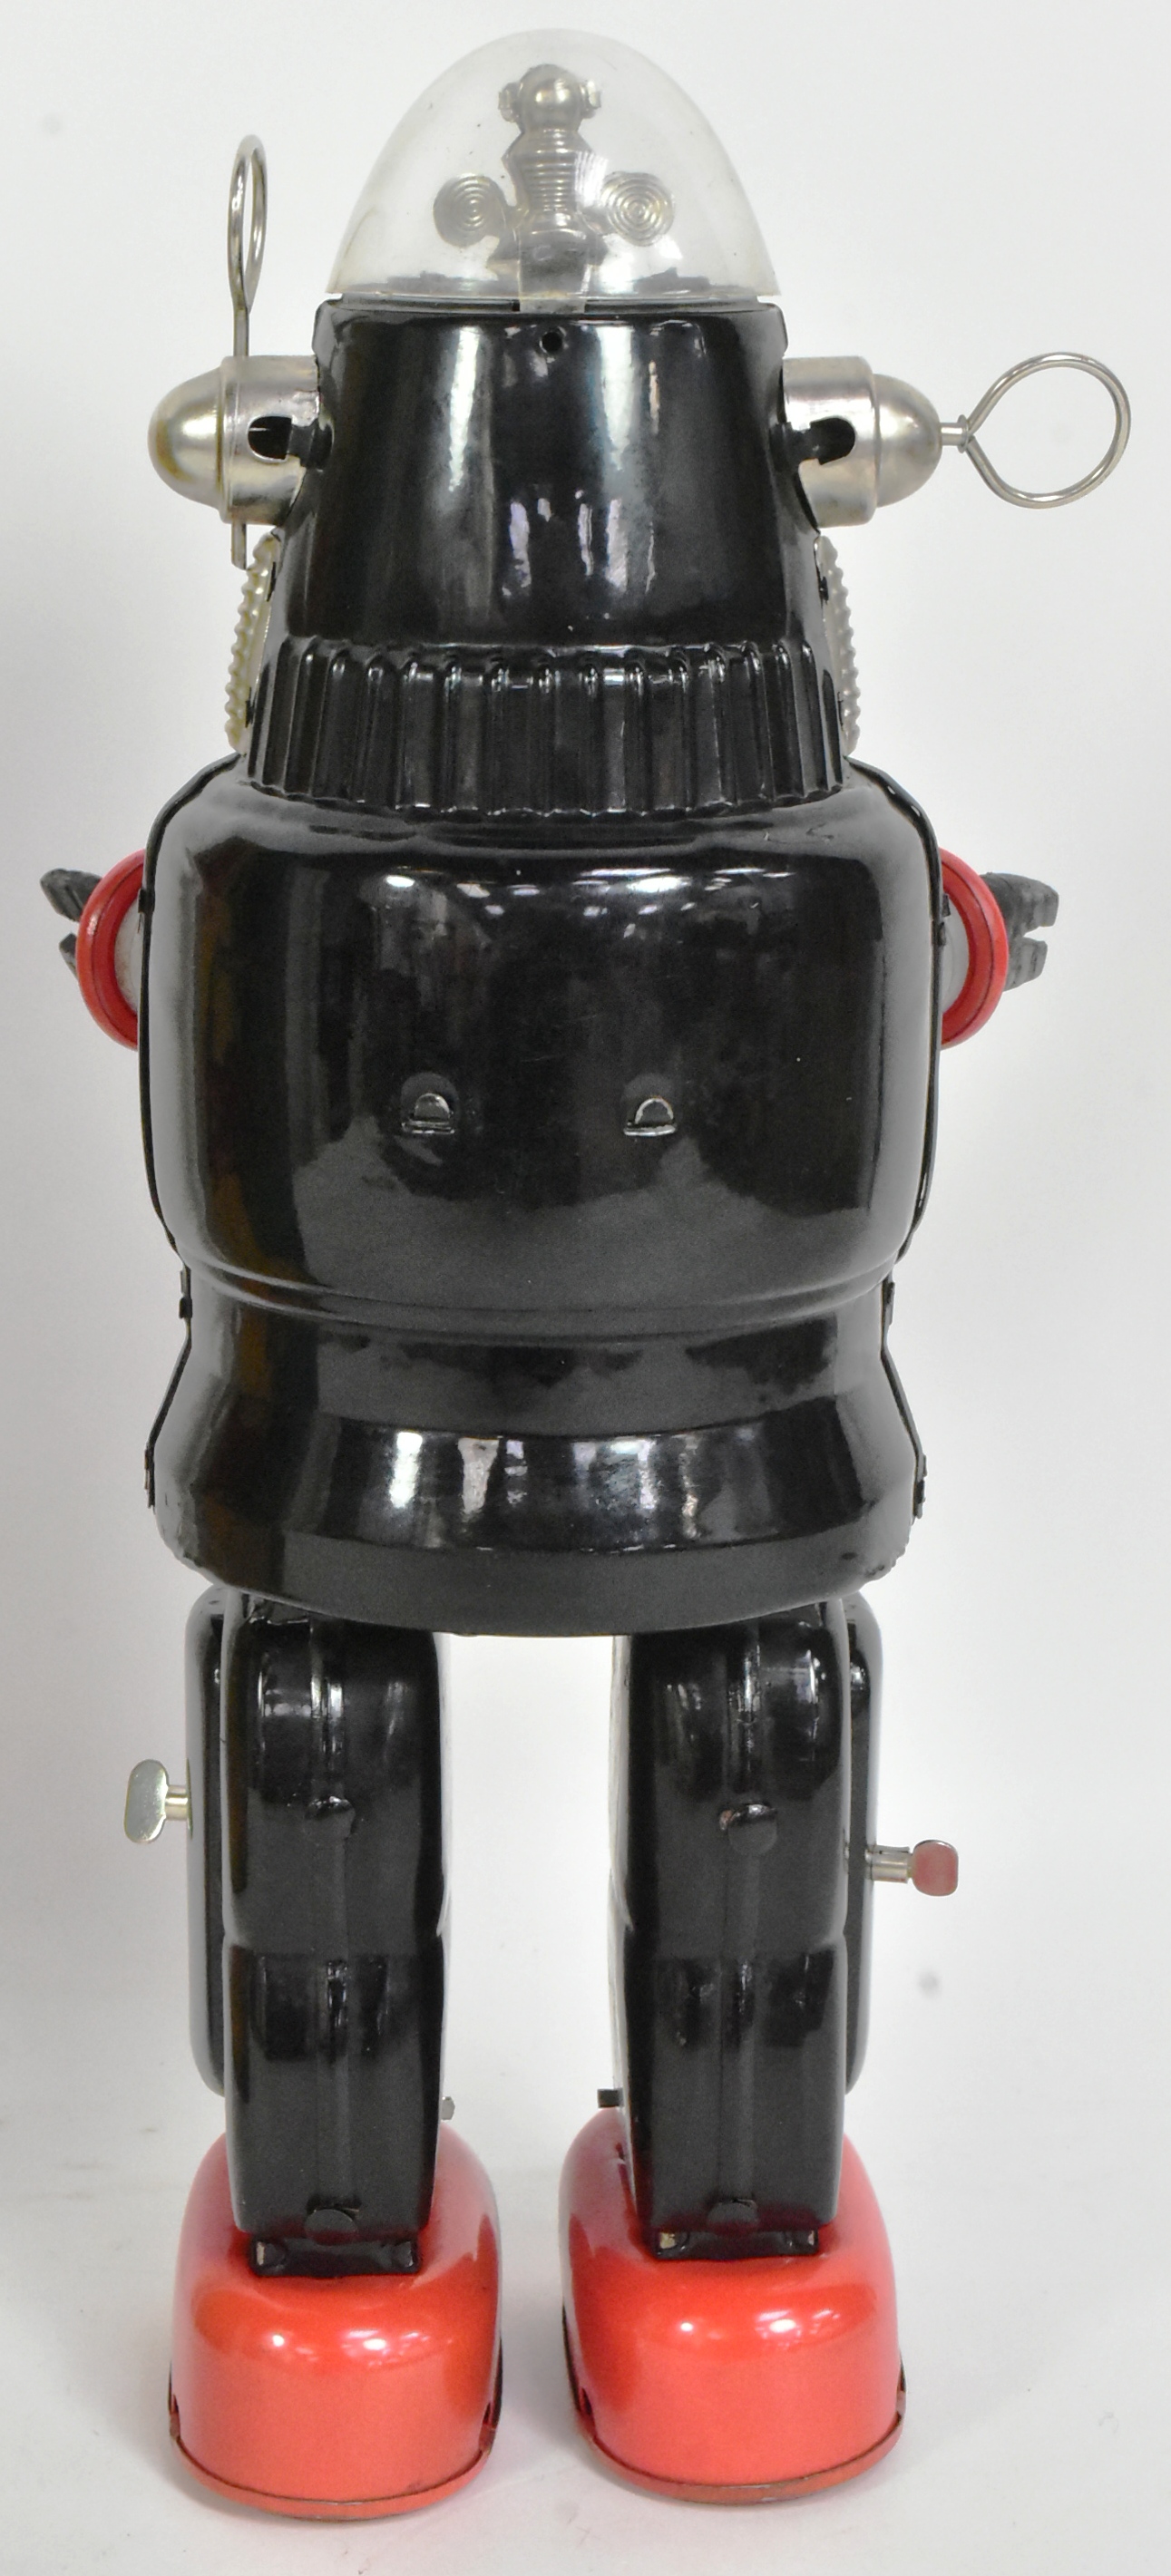 VINTAGE JAPANESE BATTERY OPERATED ROBBY THE ROBOT - Image 5 of 7